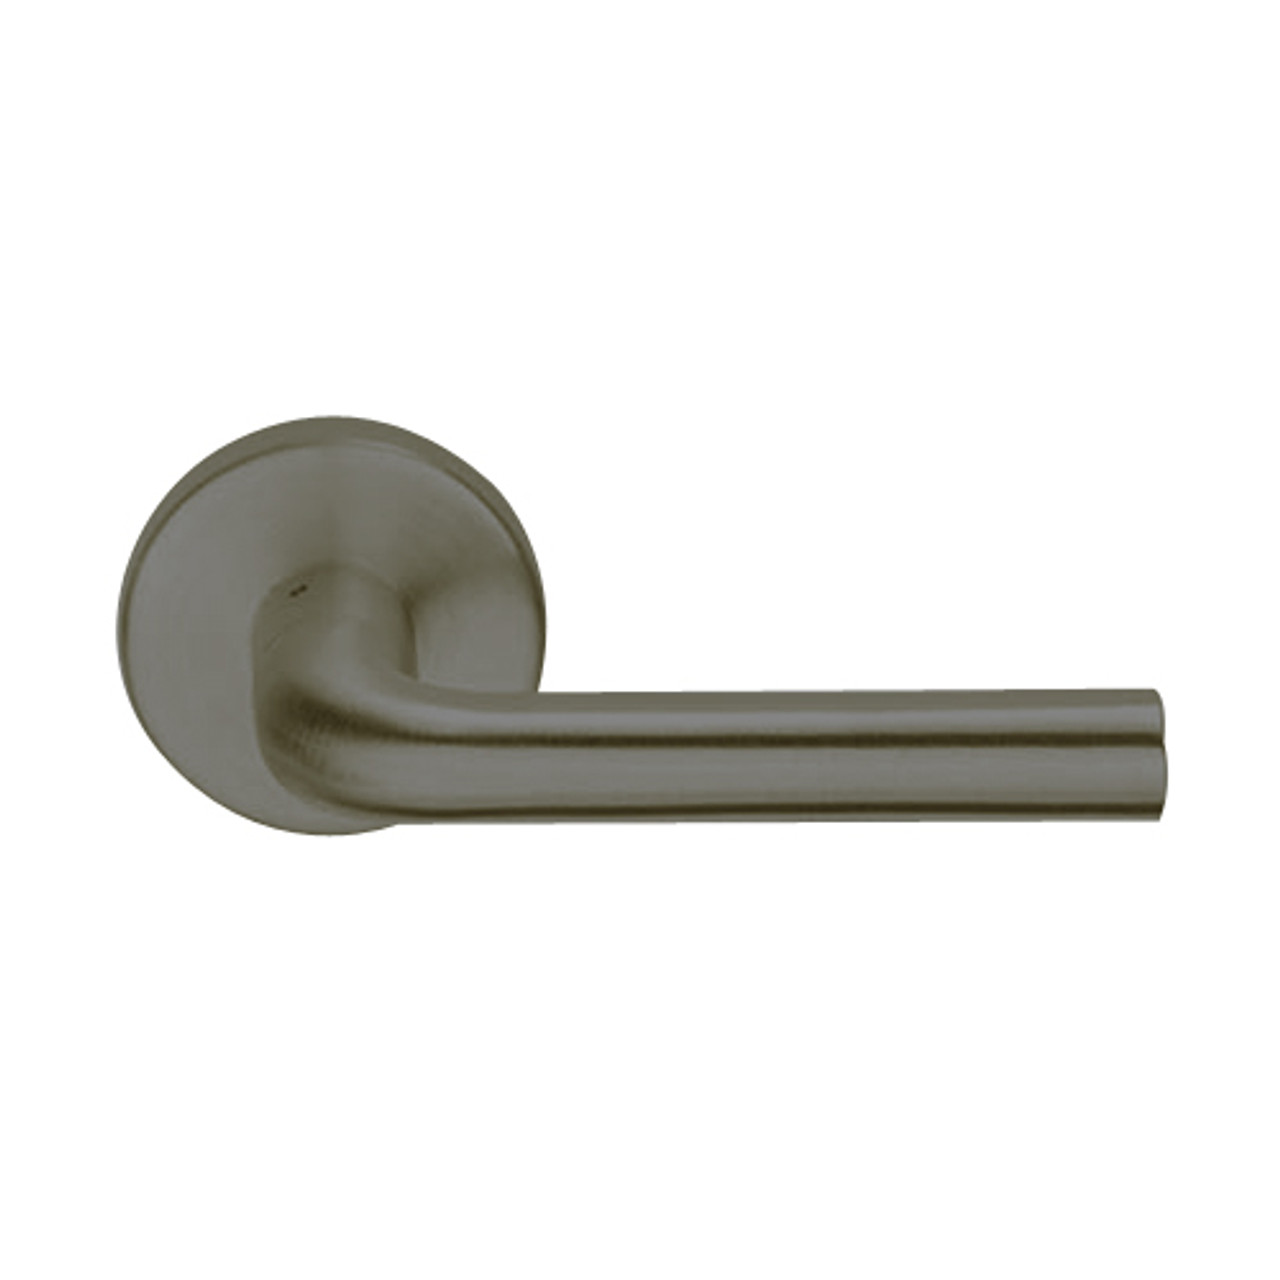 L9456L-02B-613 Schlage L Series Less Cylinder Corridor with Deadbolt Commercial Mortise Lock with 02 Cast Lever Design in Oil Rubbed Bronze